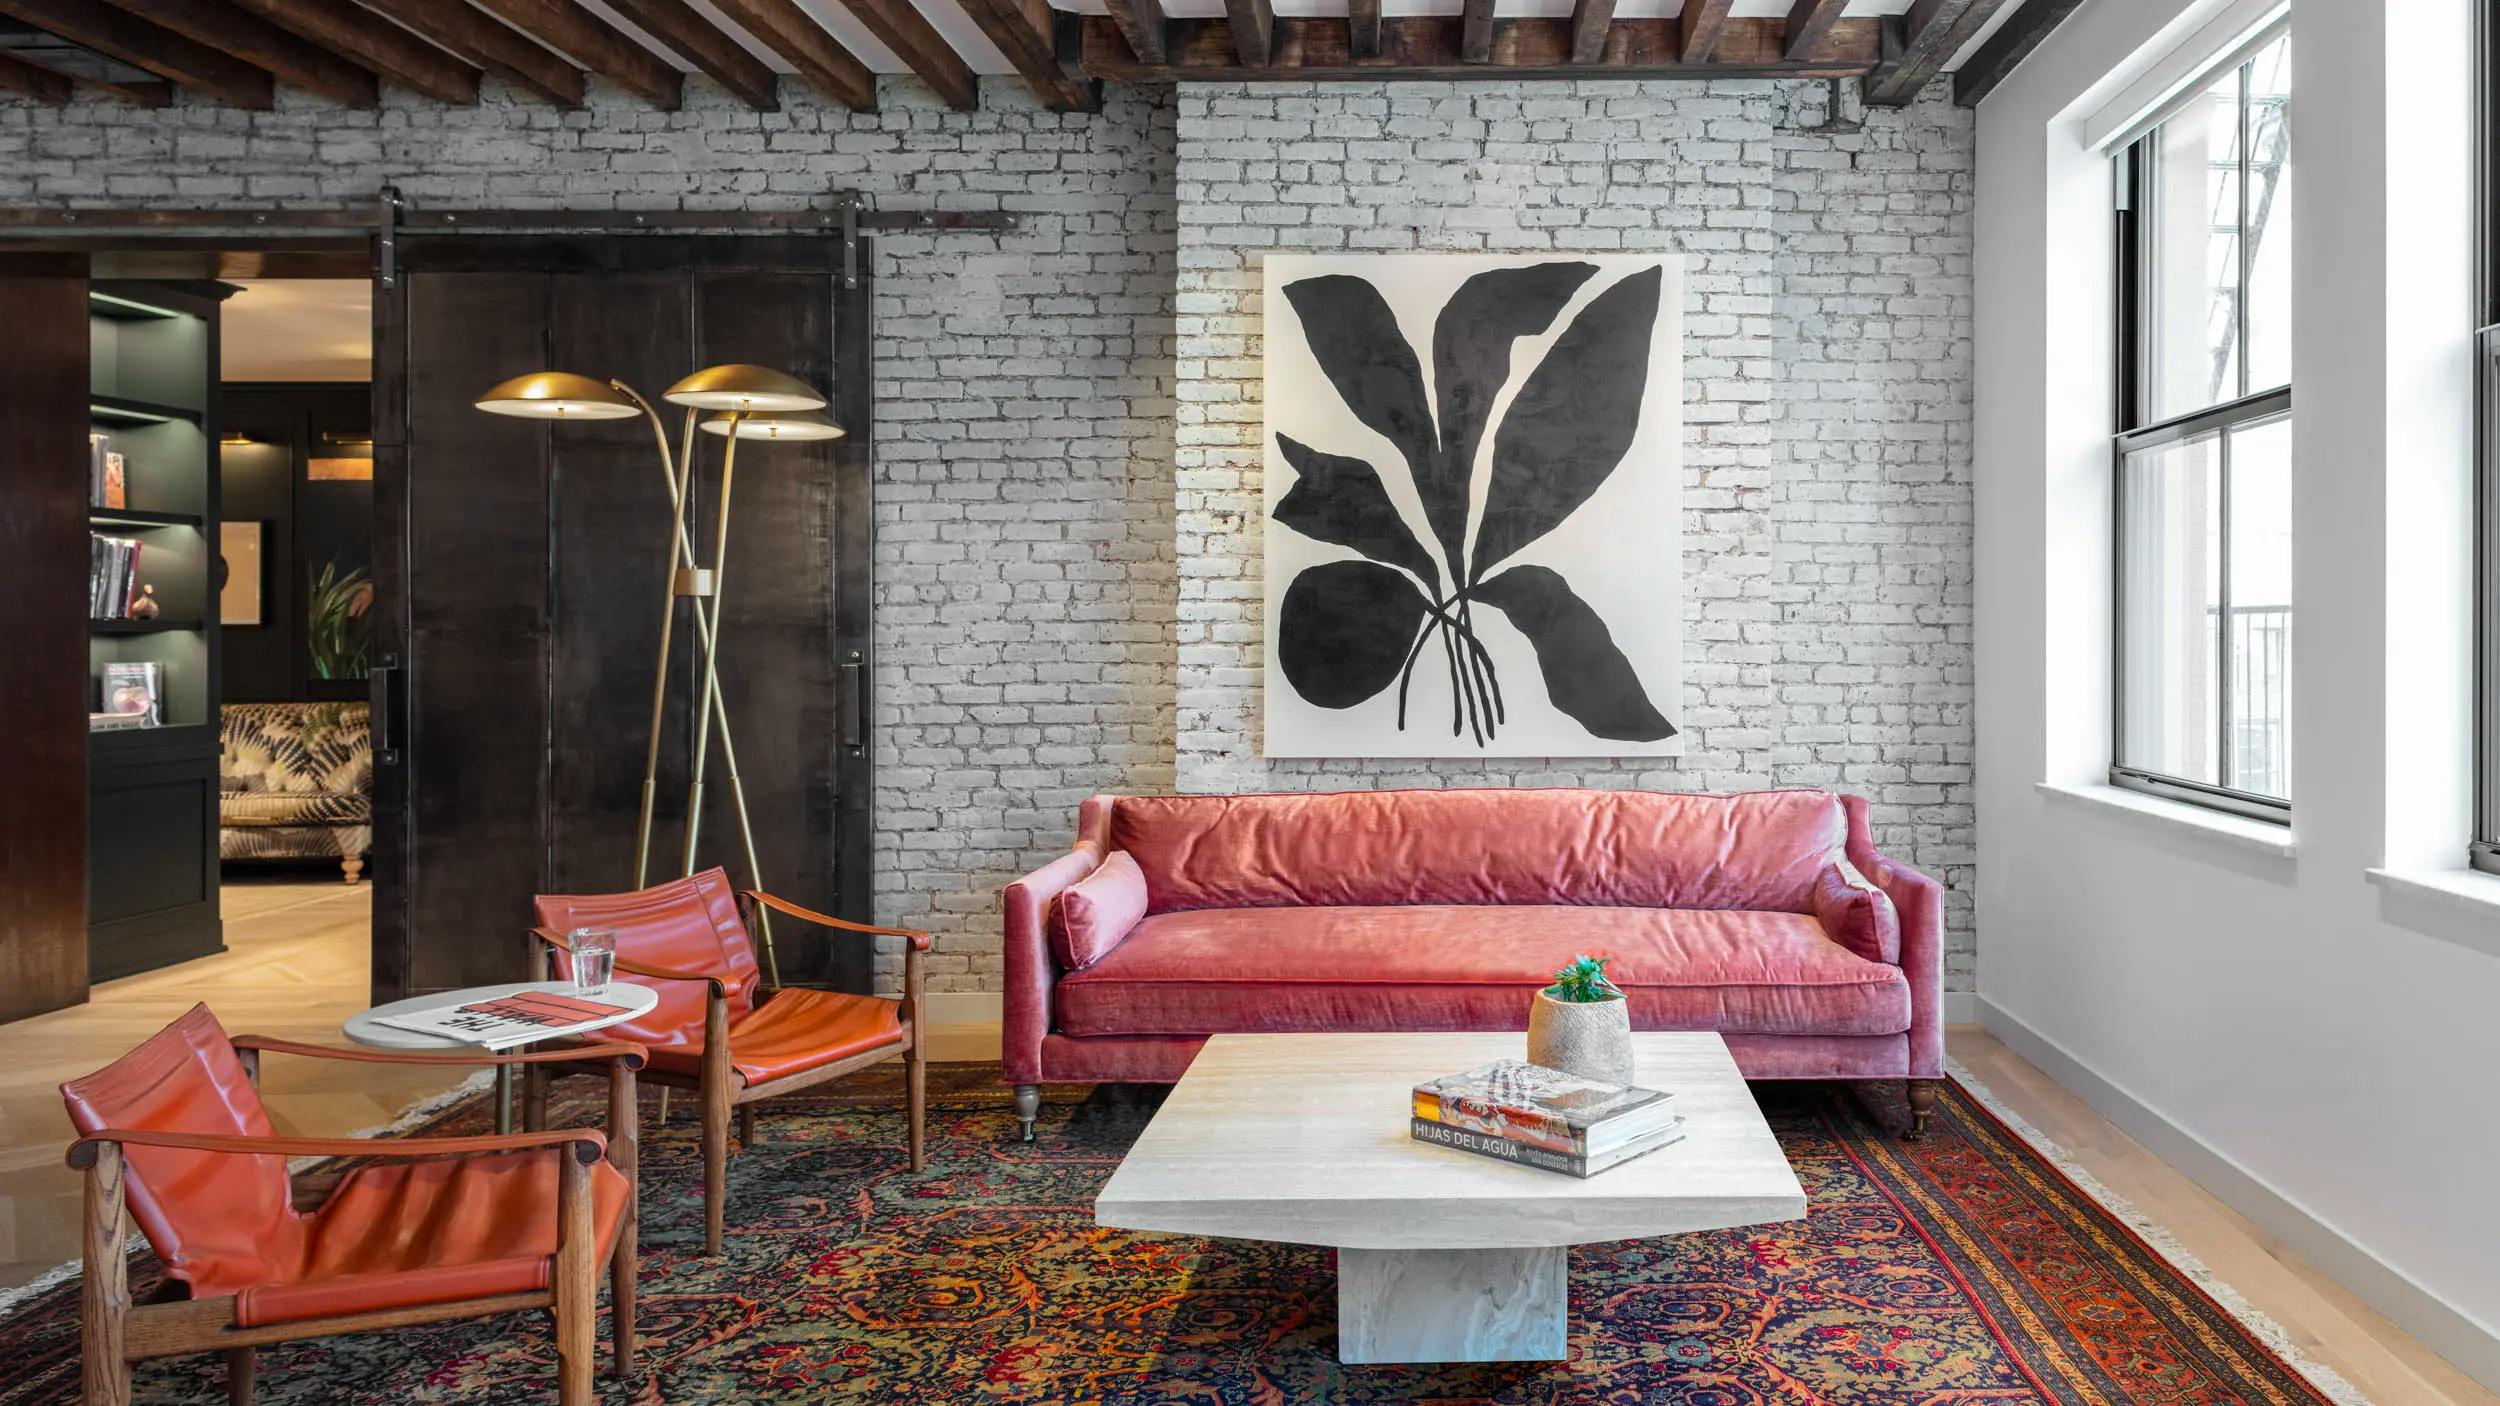 The lounge area at FIG featuring a patterned rug, two red chairs, and a large black and white botanical painting by artist Kate Roebuck on a white brick wall above a pink sofa.